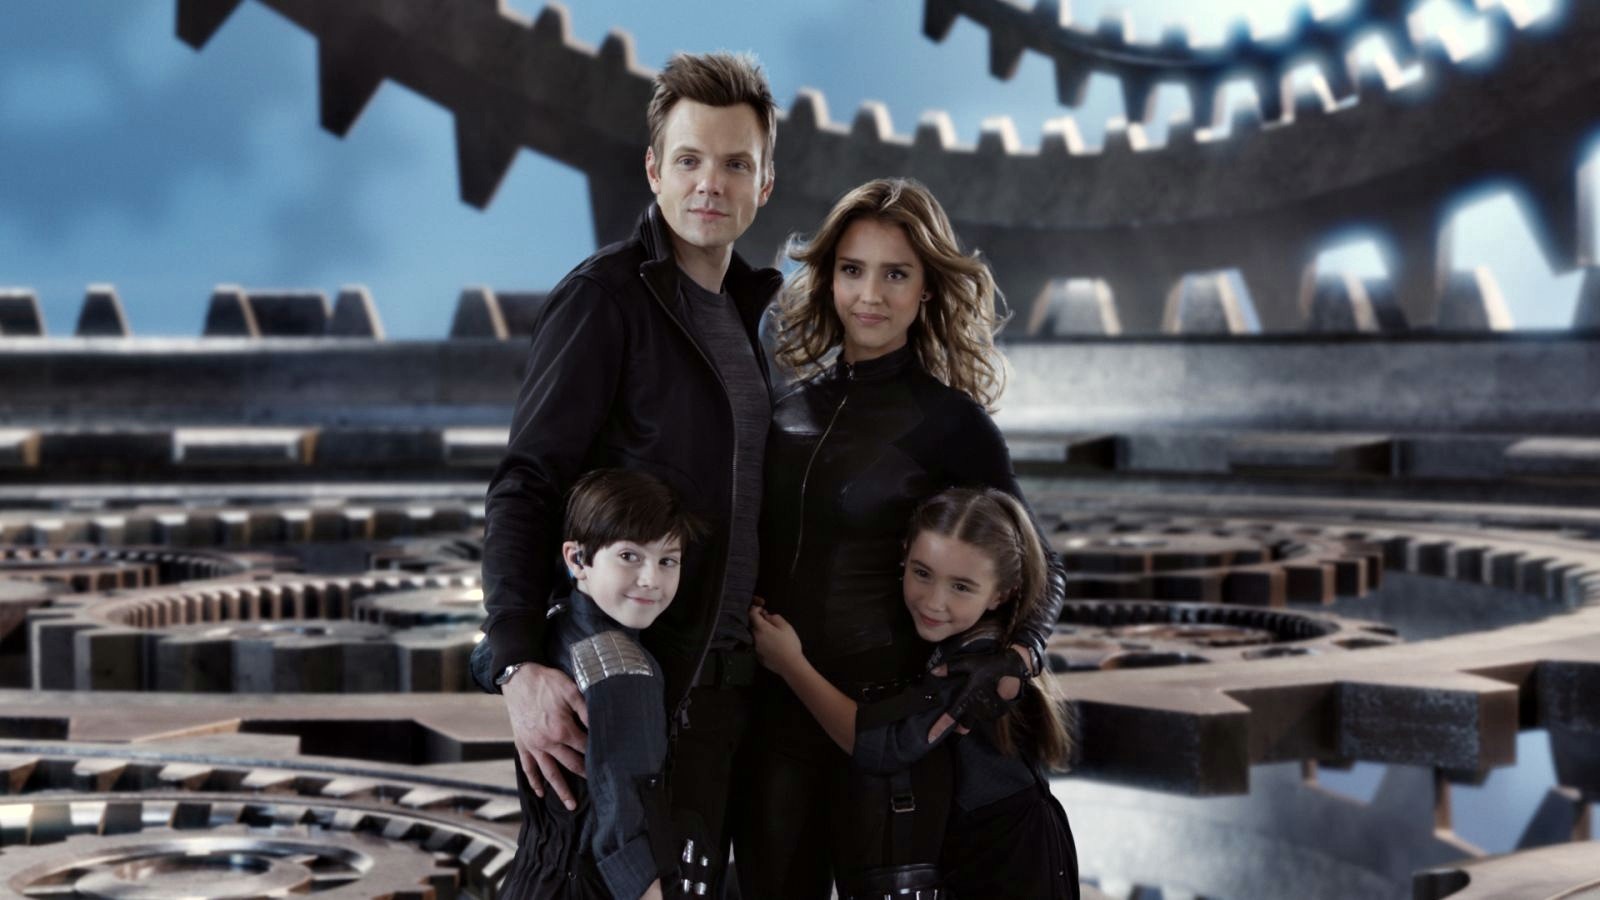 Joel McHale, Jessica Alba, Mason Cook and Rowan Blanchard in Dimension Films' Spy Kids 4: All the Time in the World (2011)